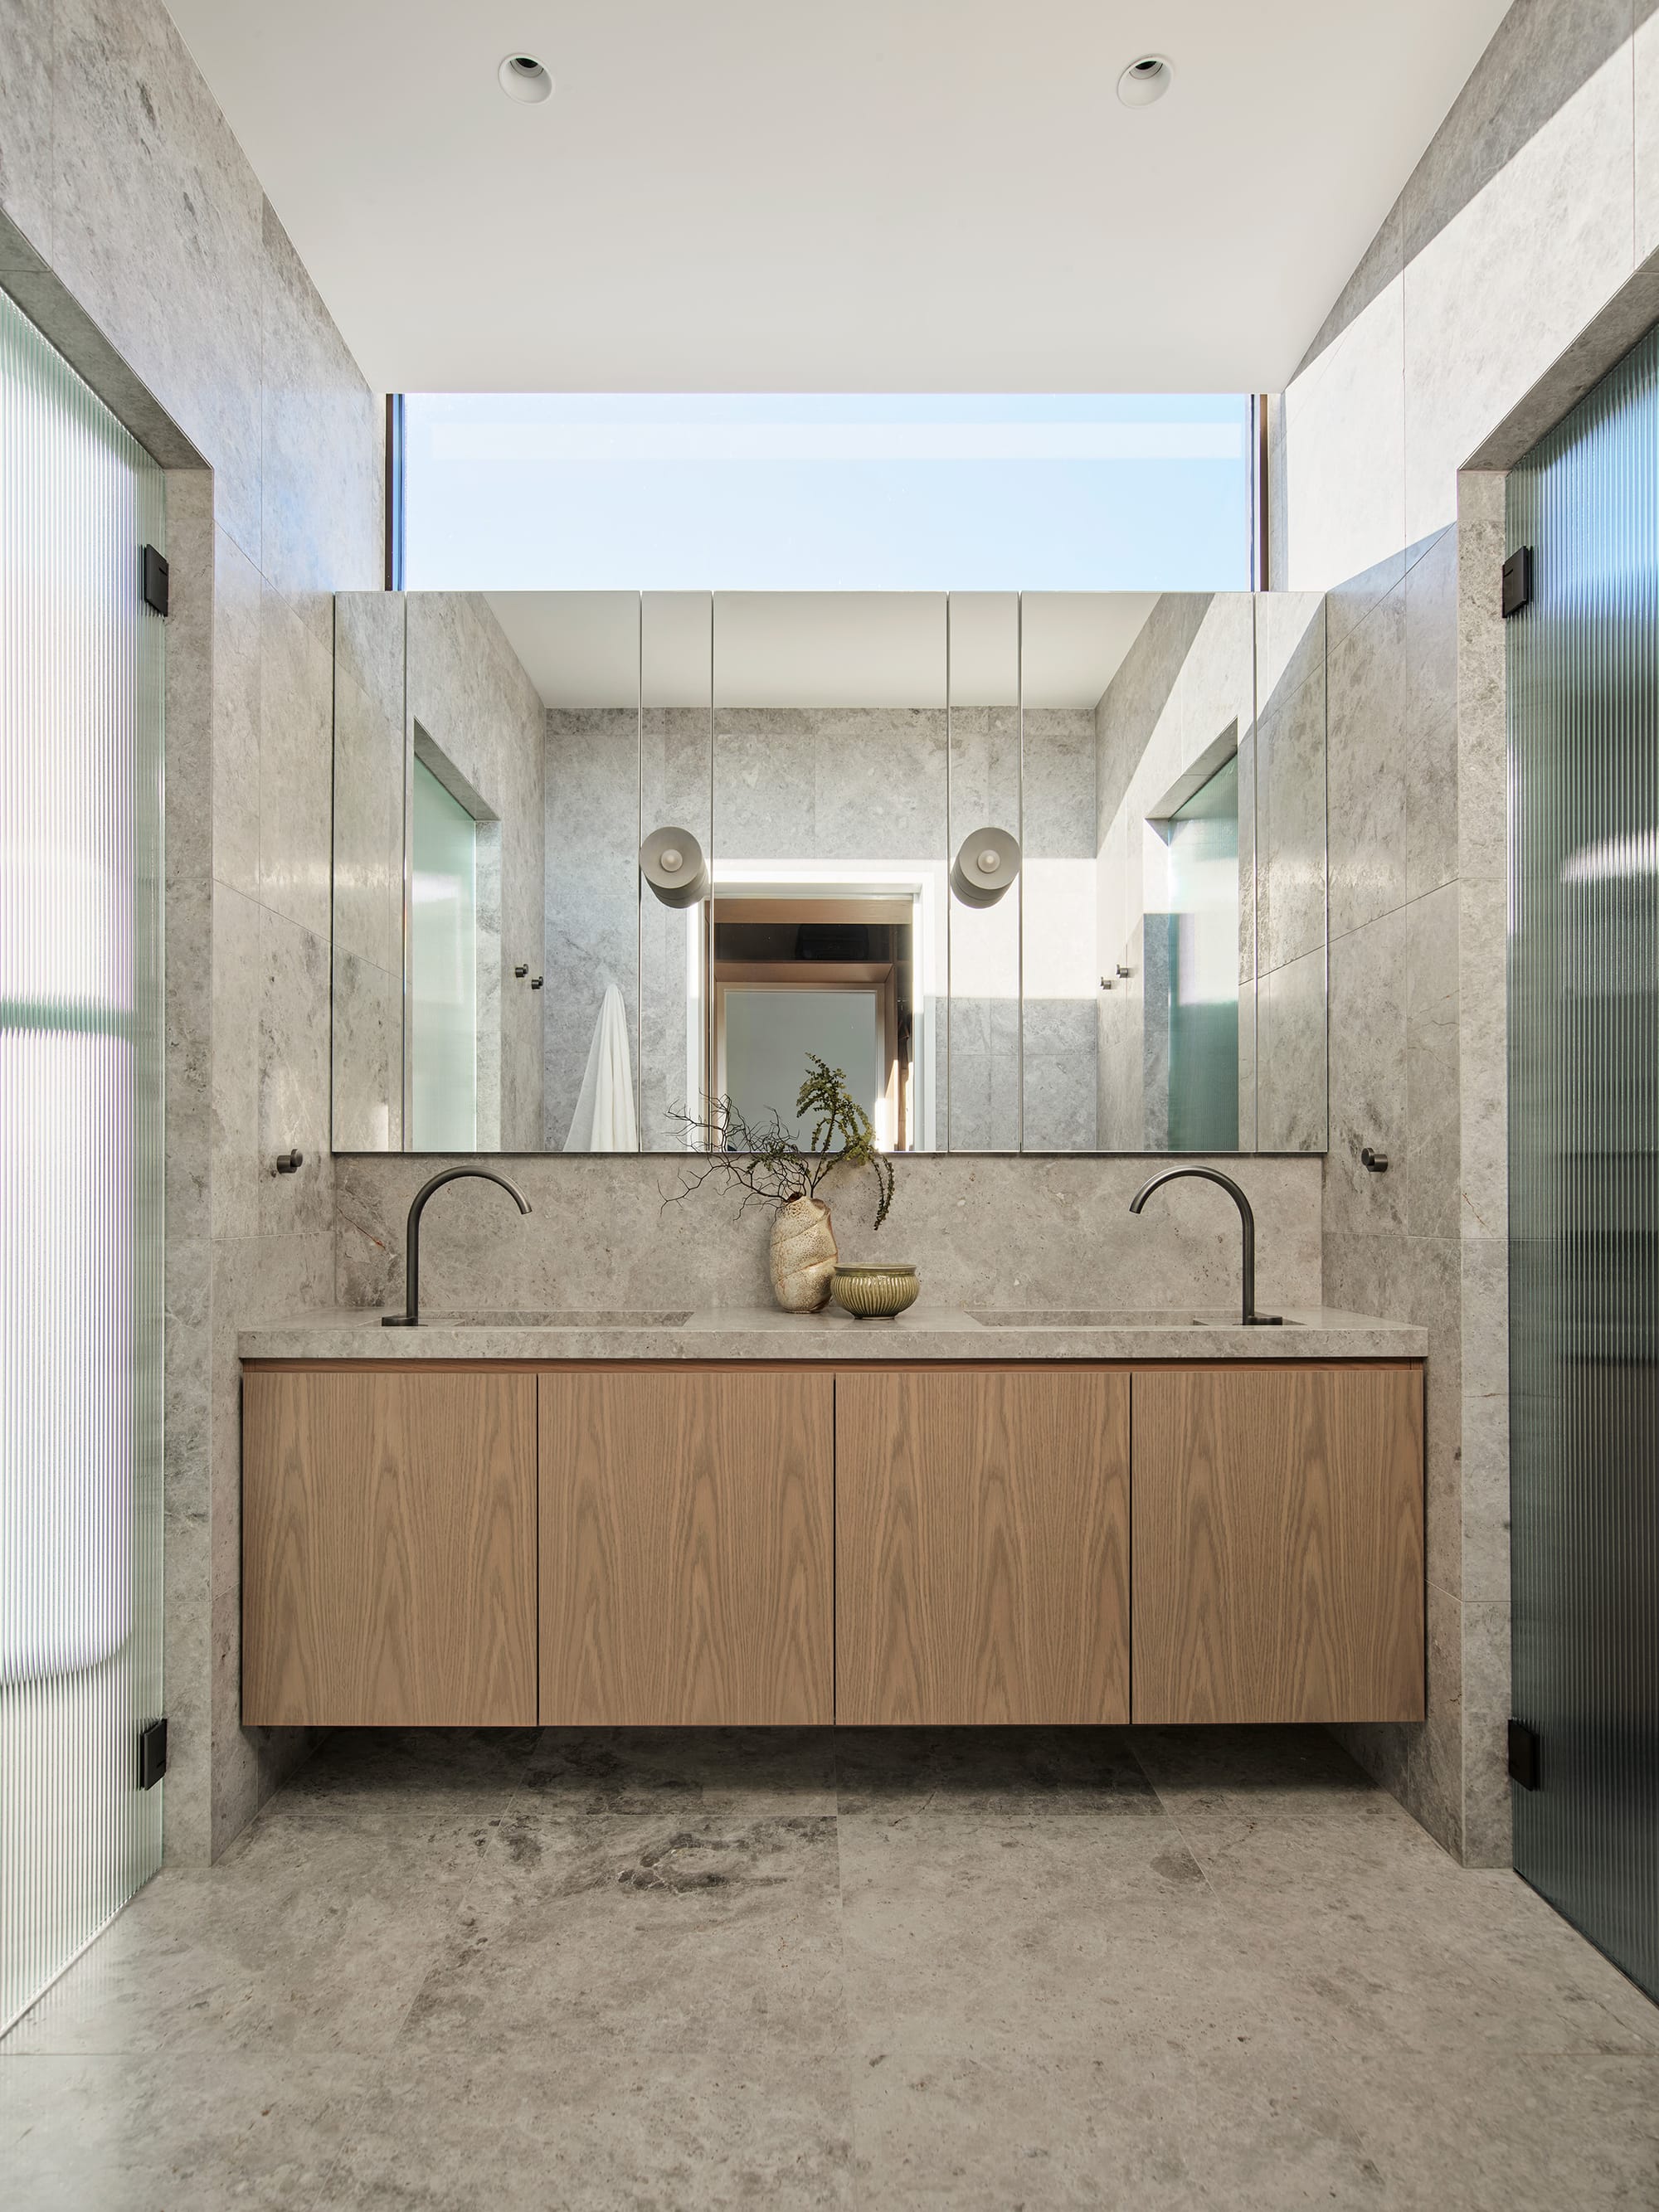 Warren House by CM Studio. Photography by Nic Gossage. Bathroom with grey tiles on floor and wall. Timber counter with double sink. 